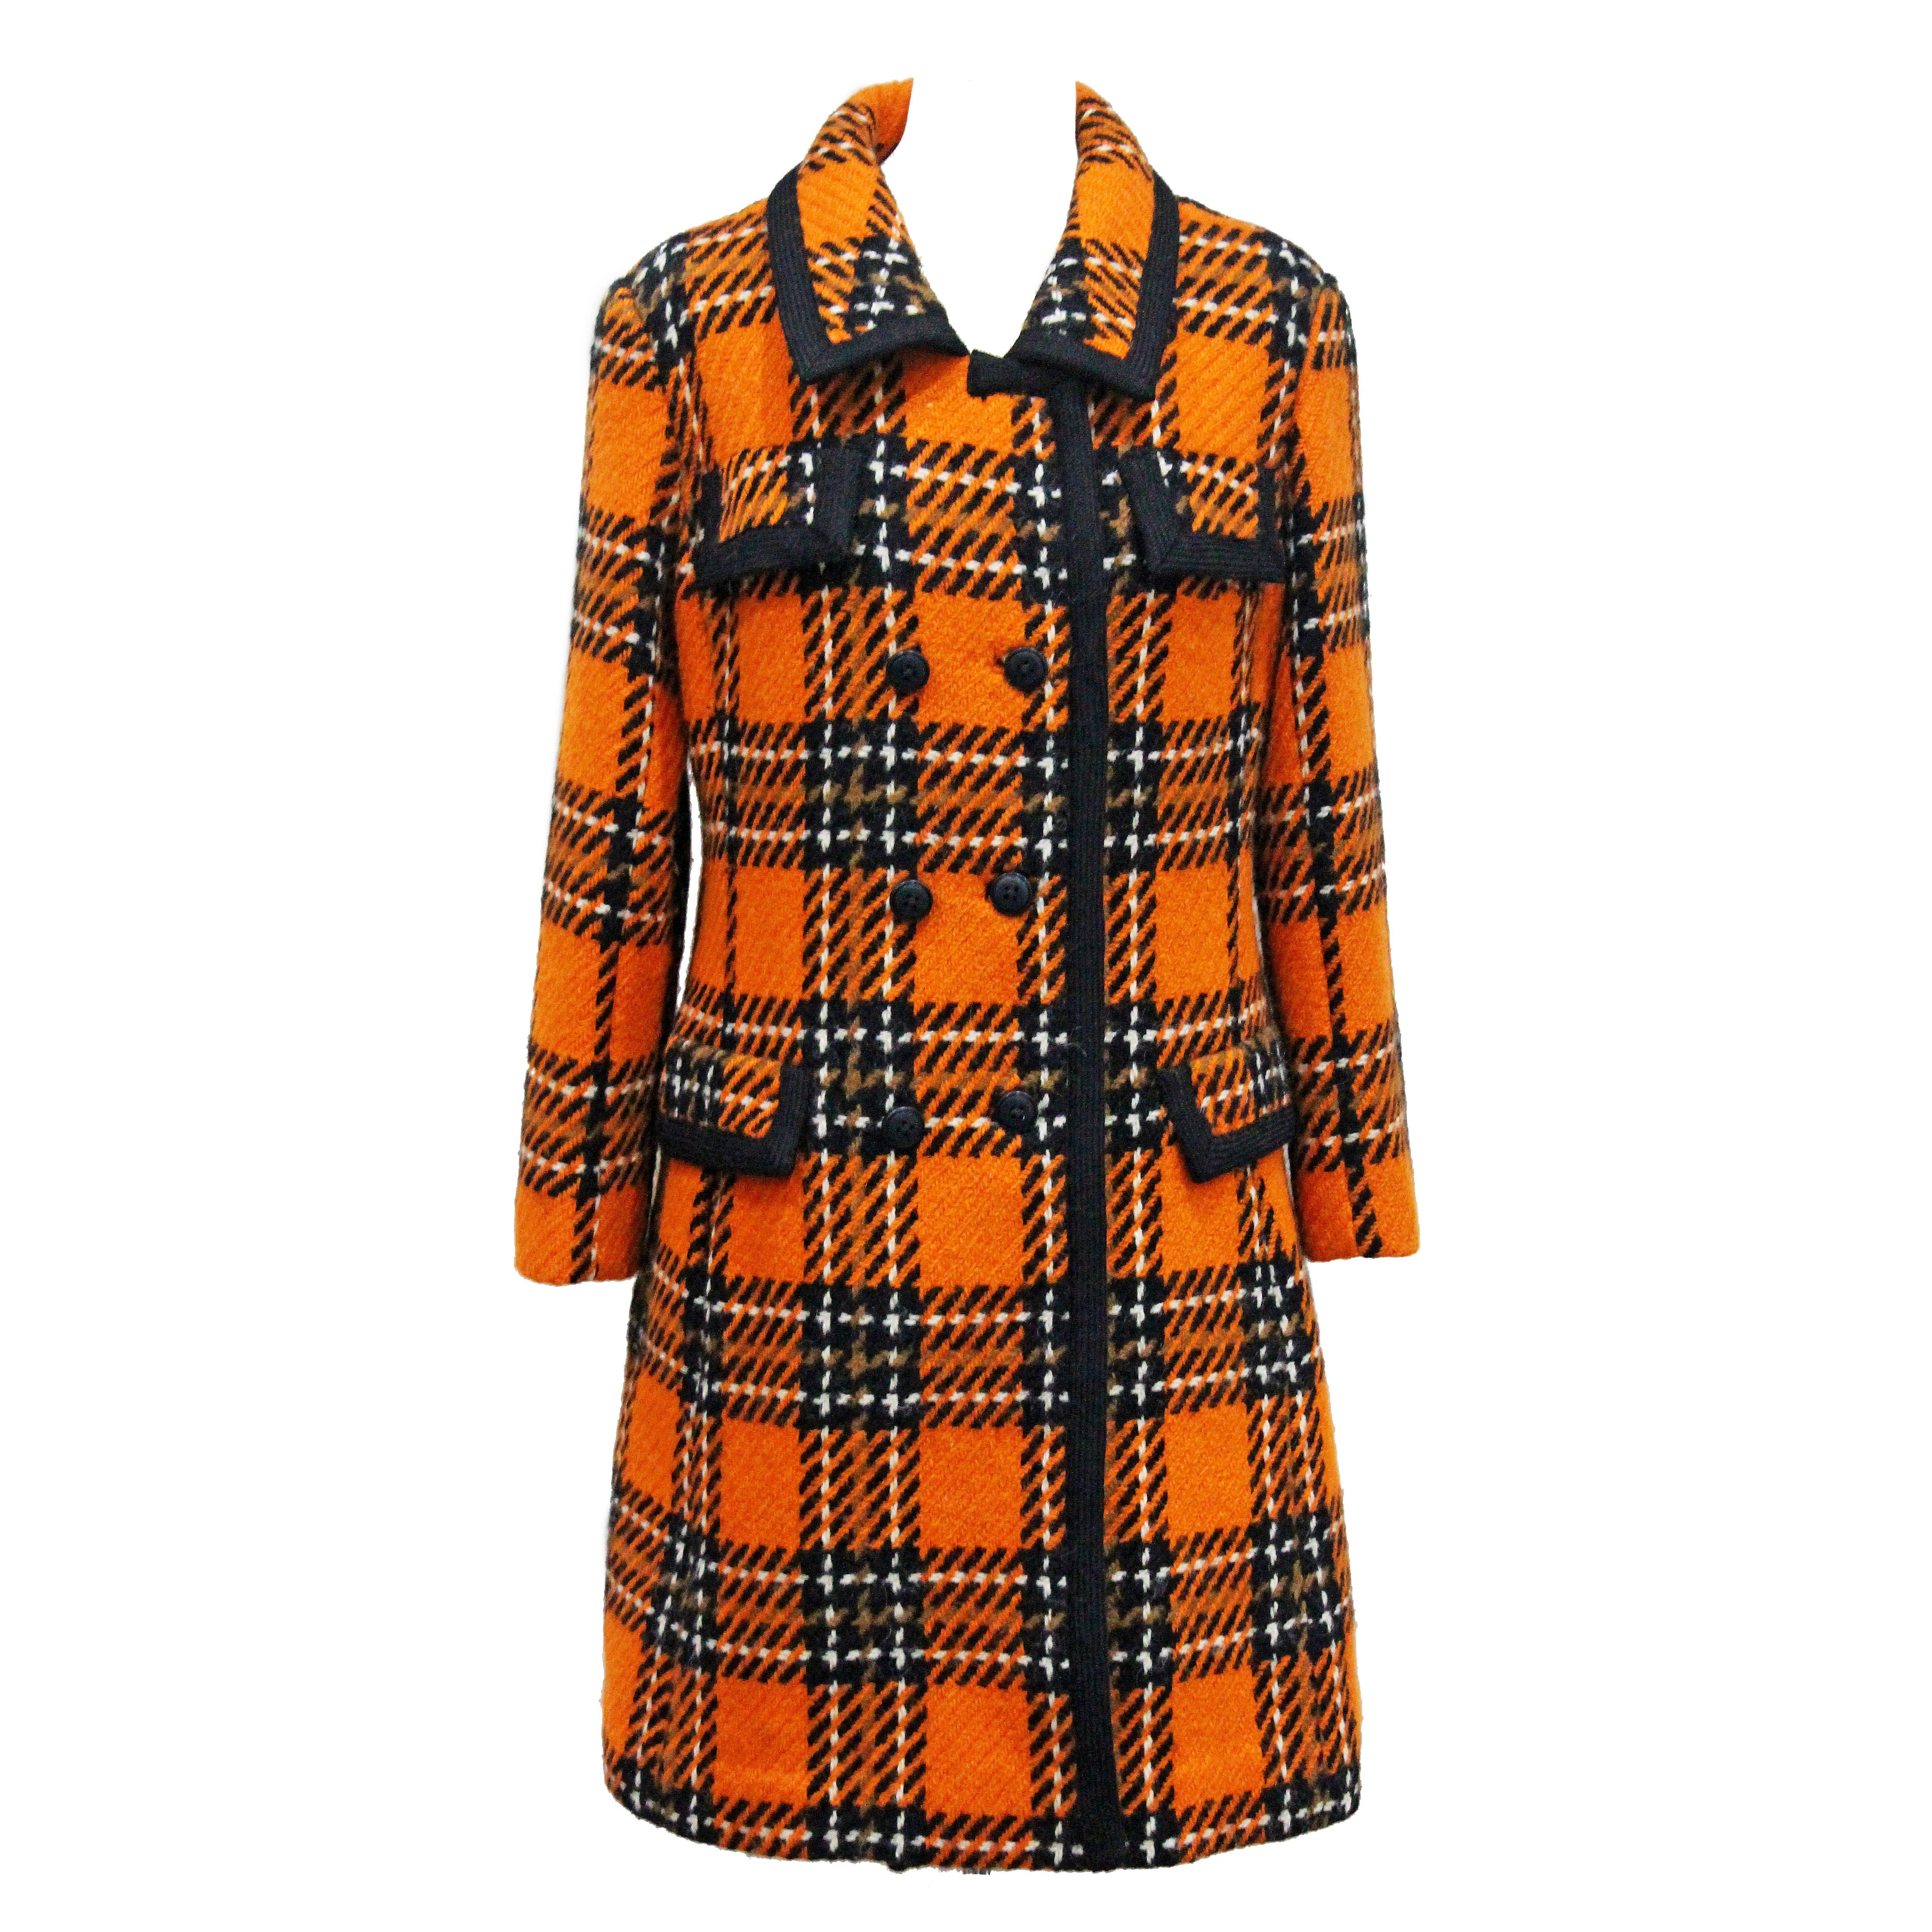 1960s English checked tweed tailored coat by Royal Dressmaker, Hardy Amies 